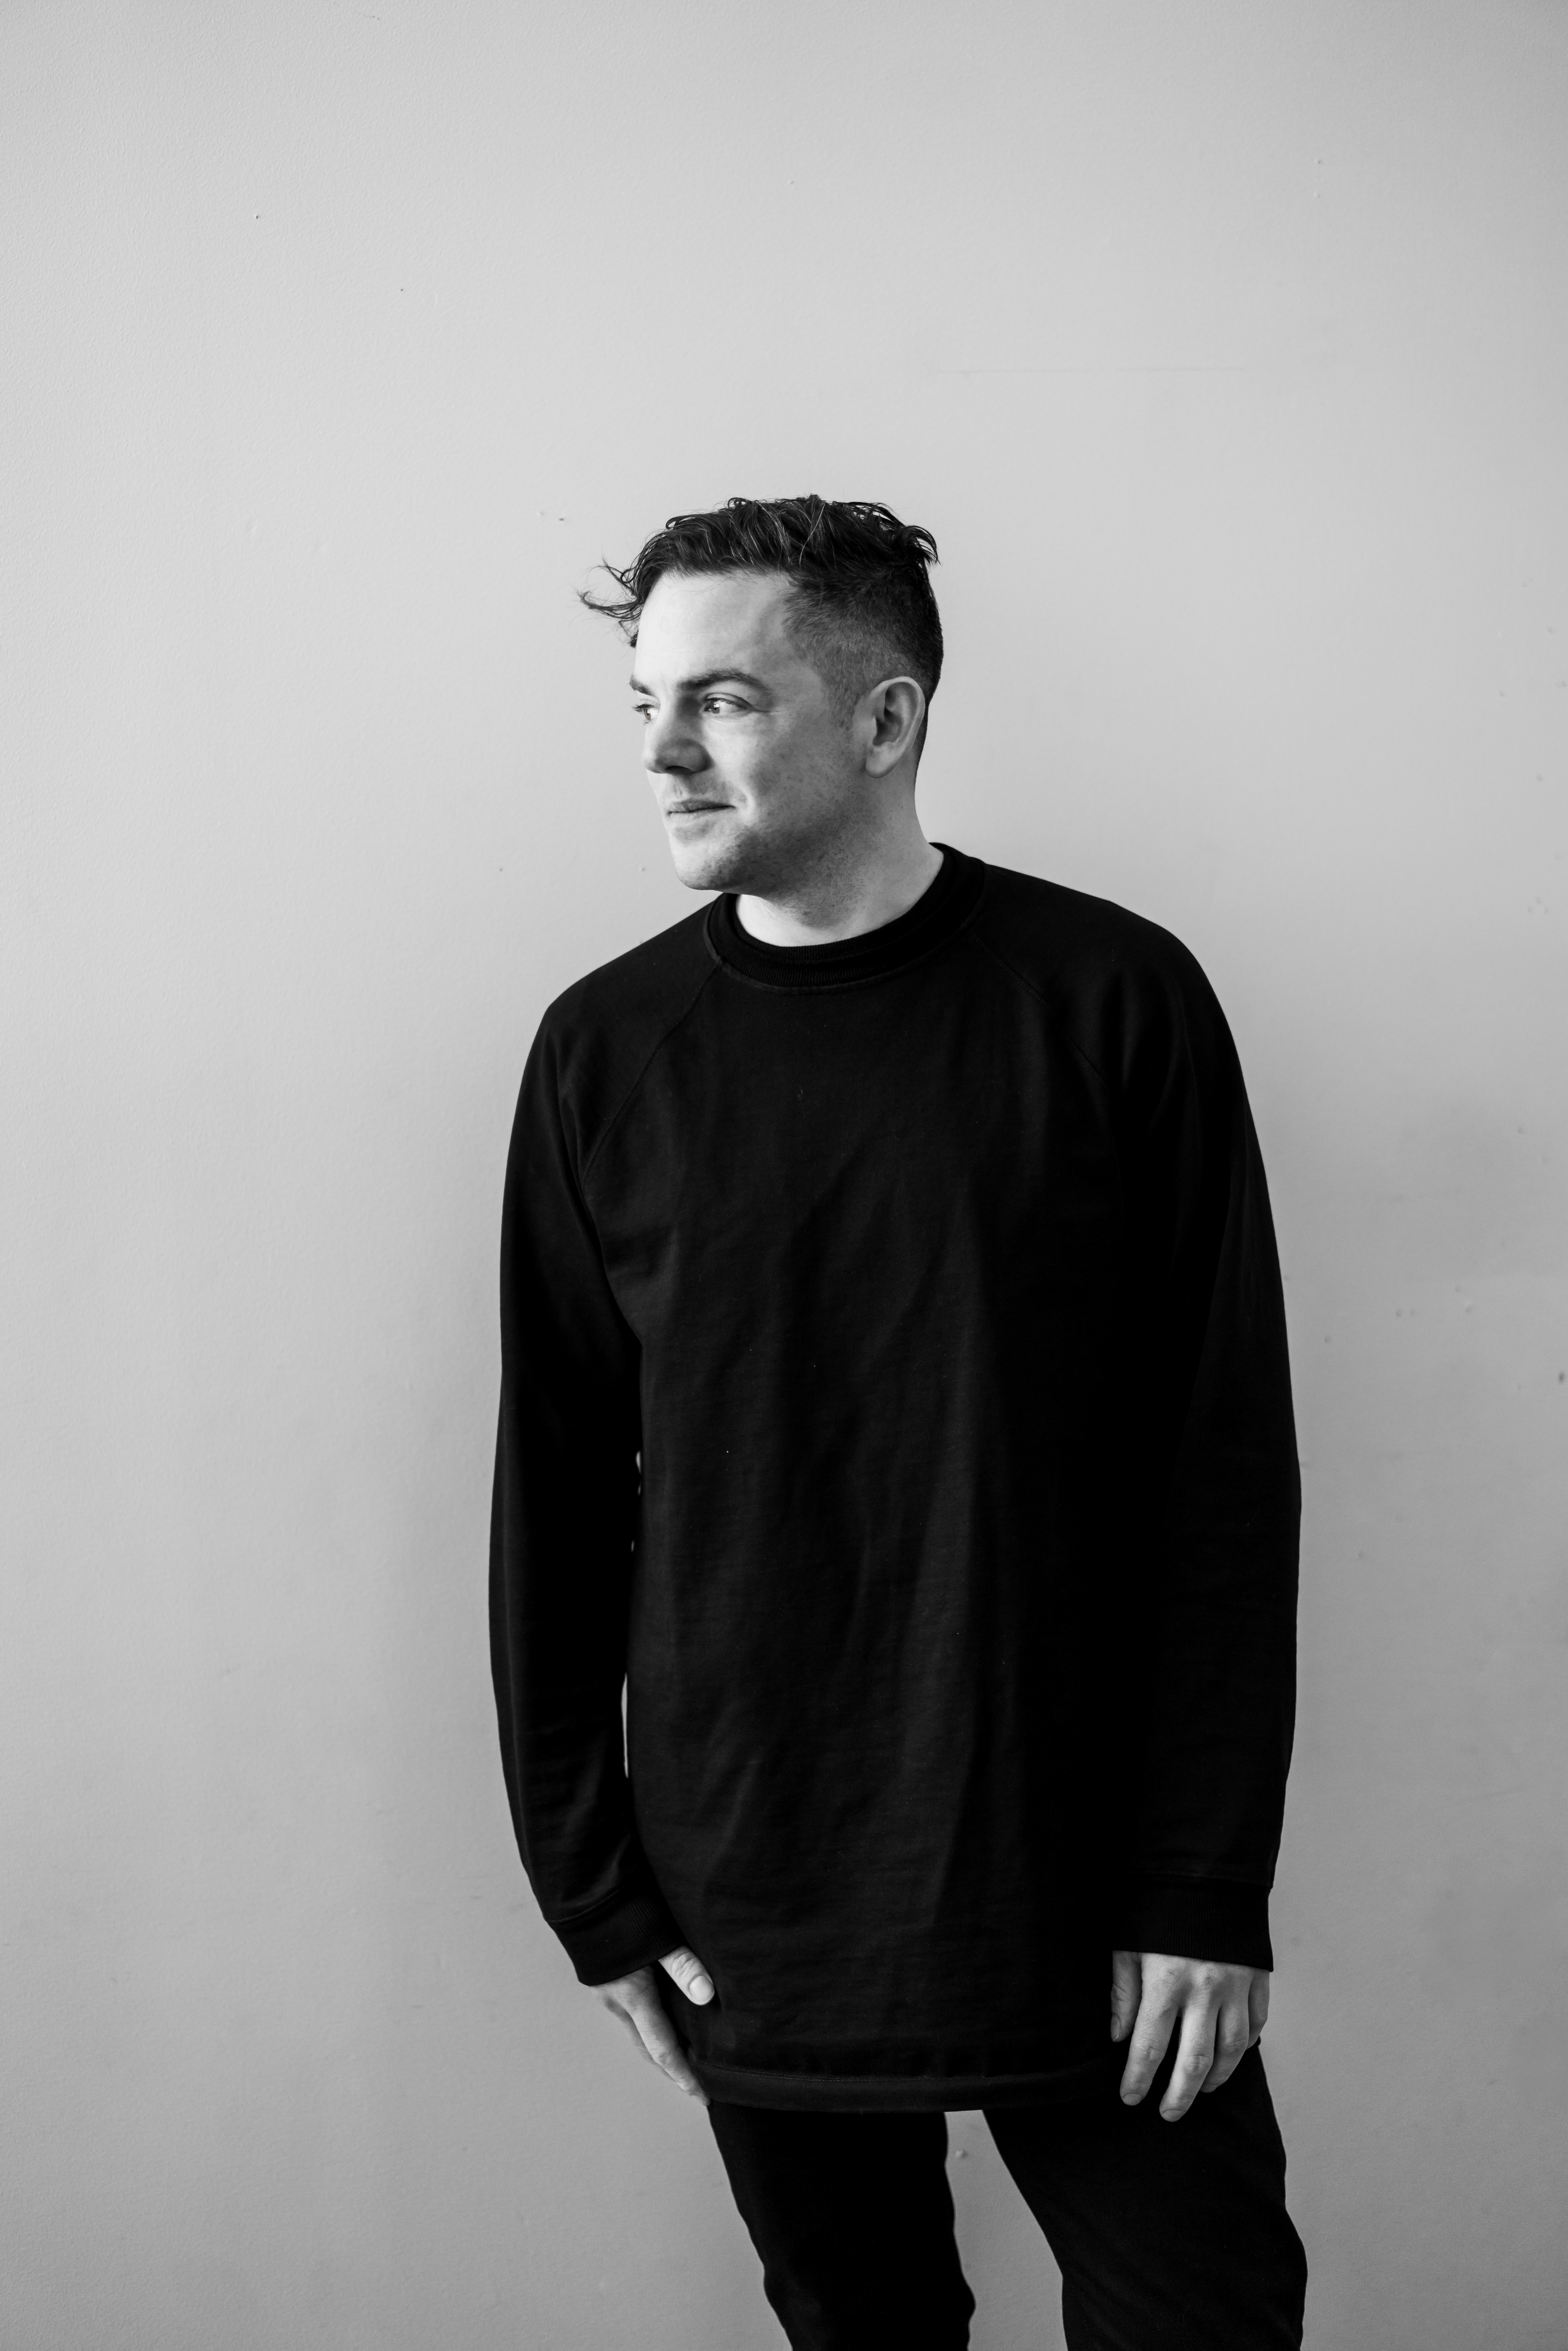 Acclaimed composer Nico Muhly on his palette of contemporary art music